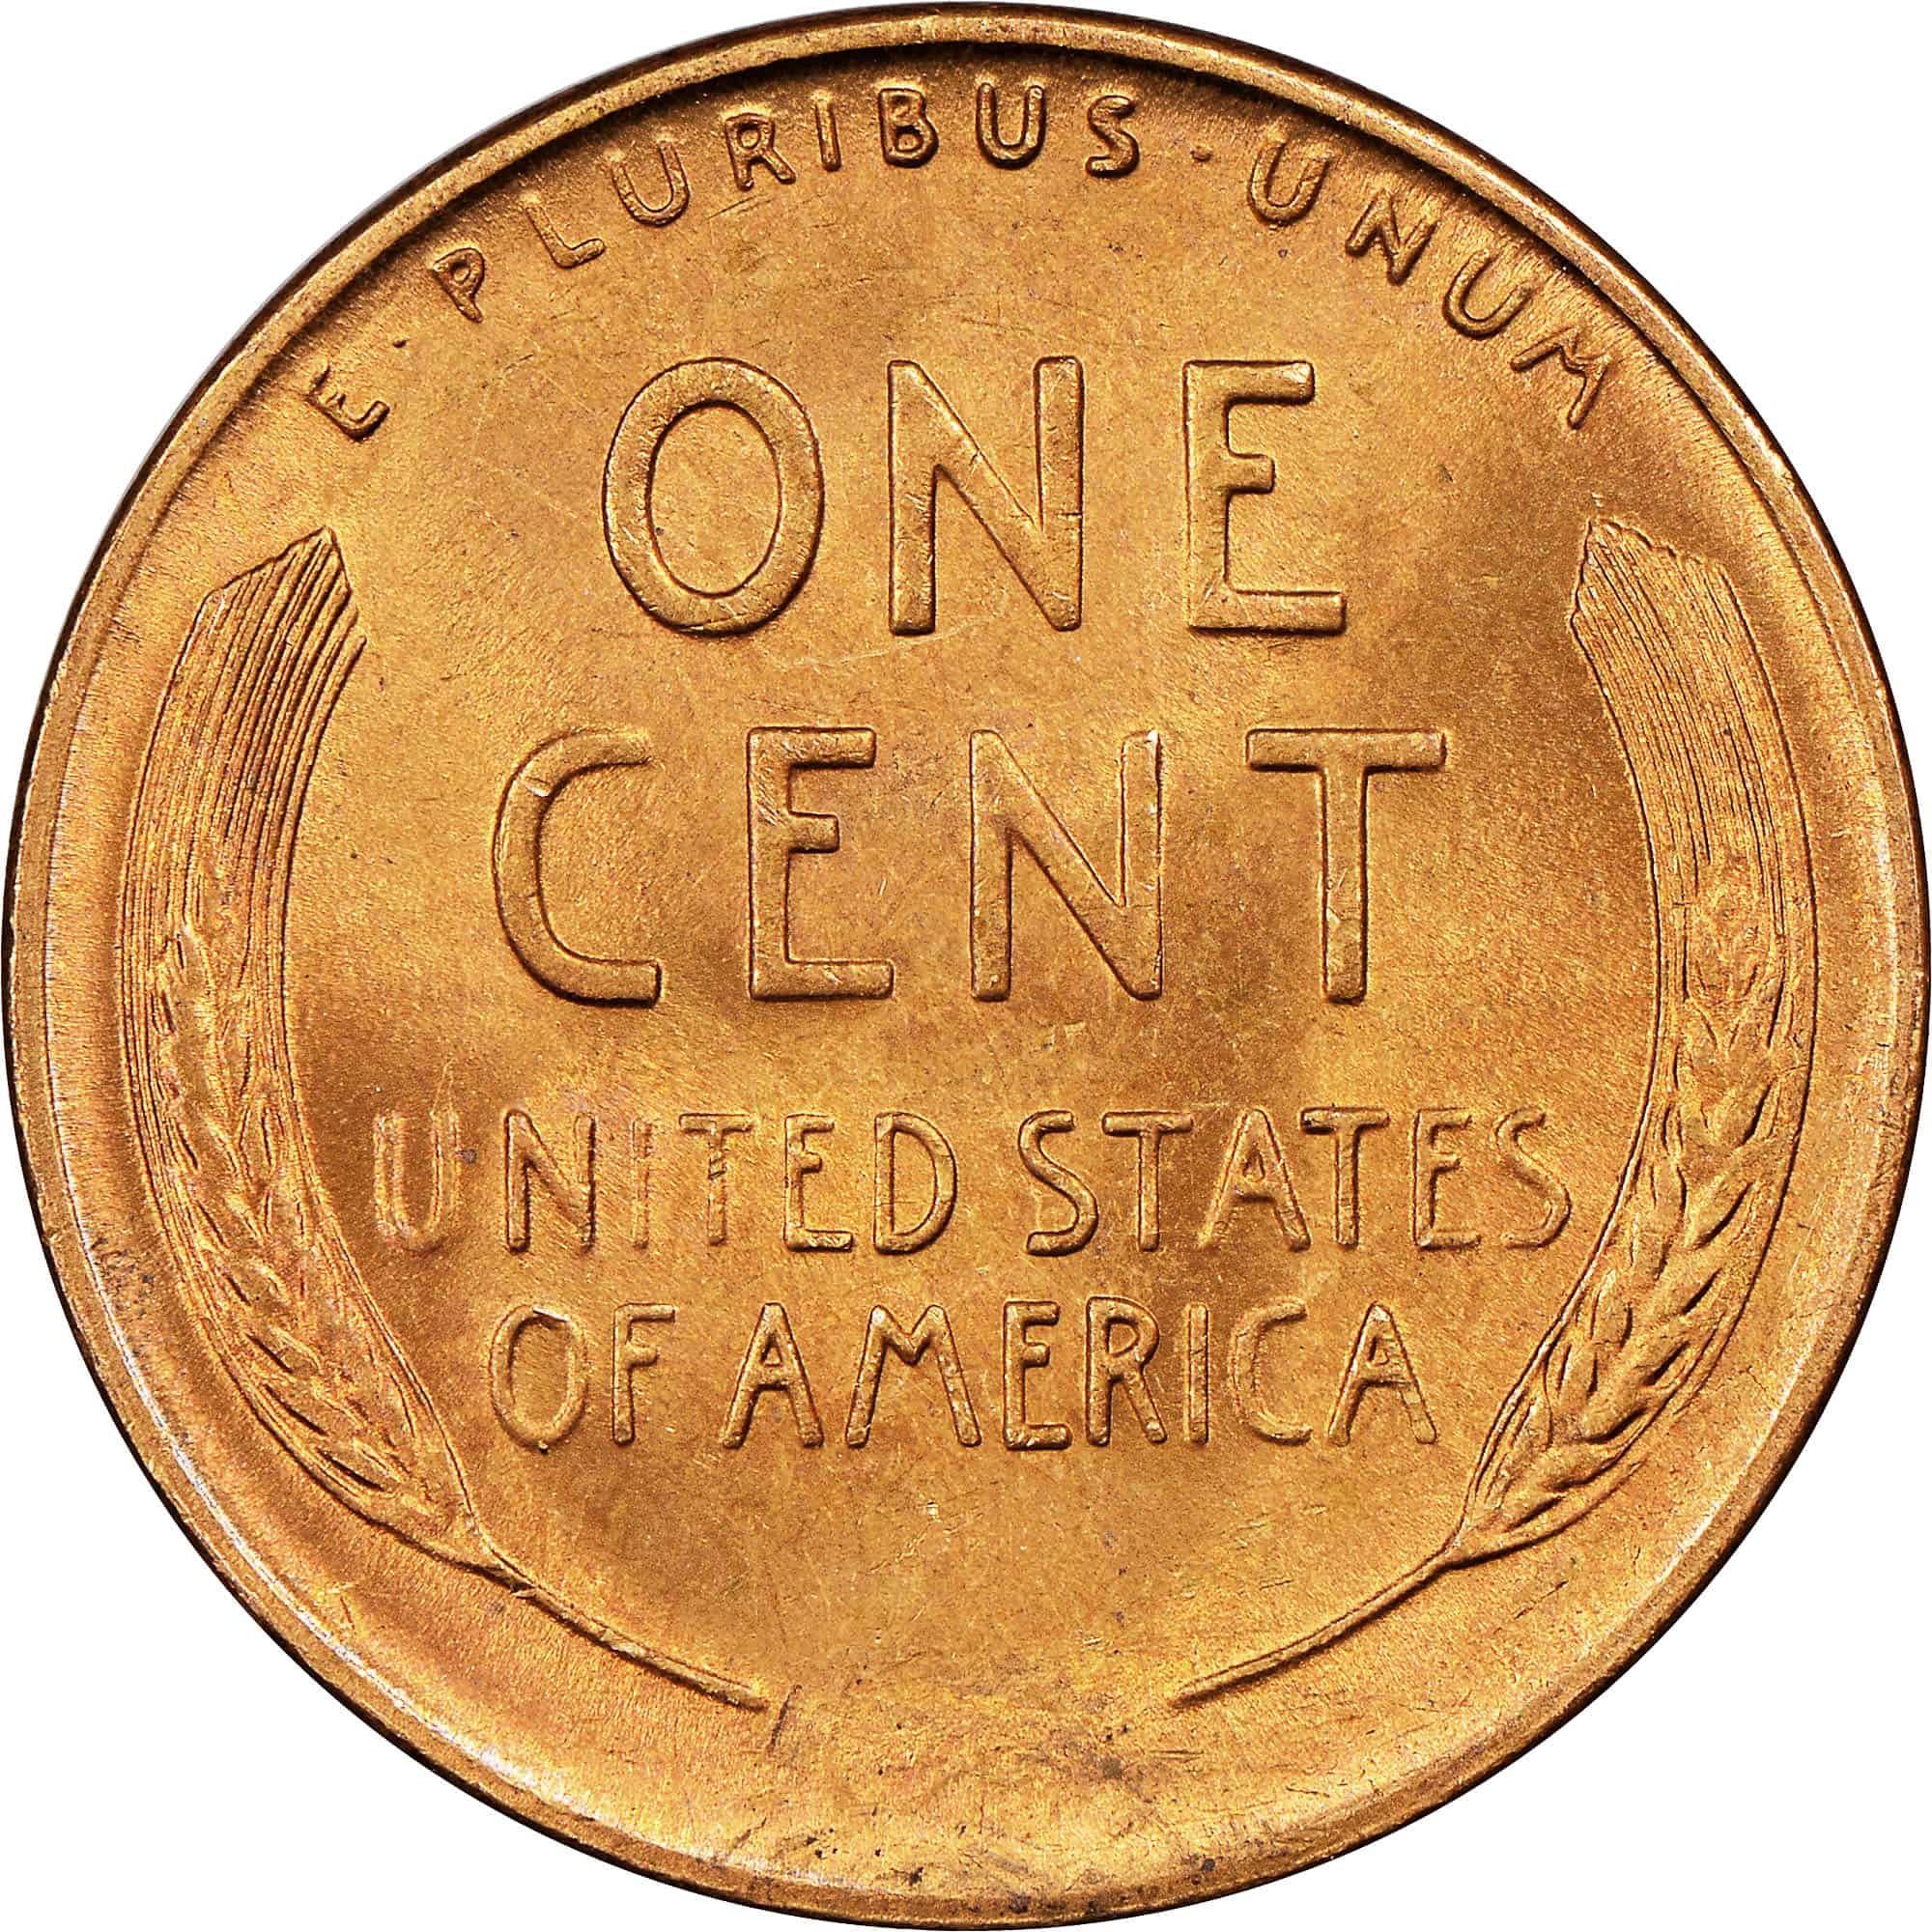 The Reverse of the 1947 Wheat Penny